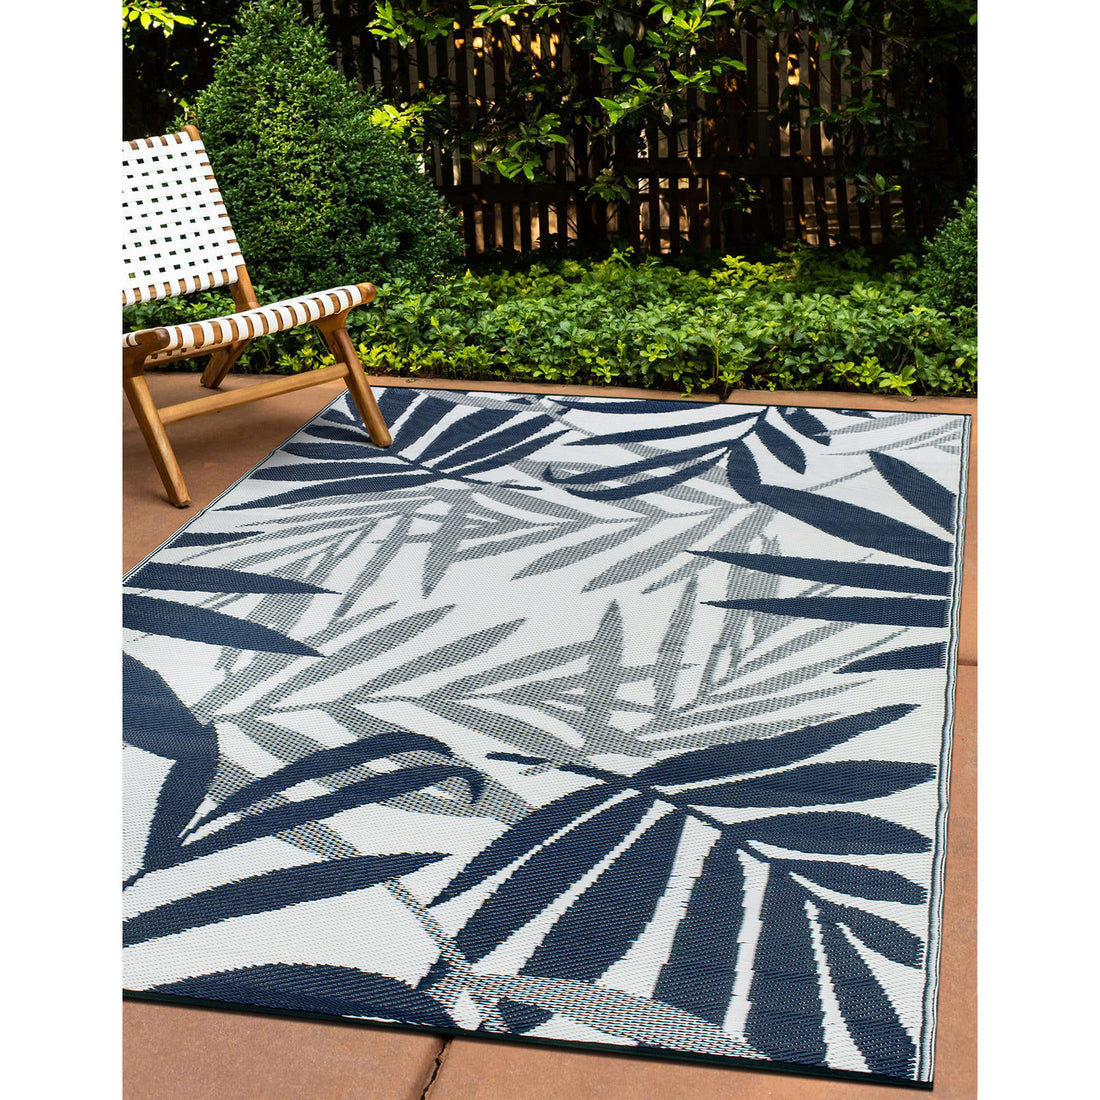 Contemporary Floral Leaves Reversible Recycled Plastic Outdoor Rugs